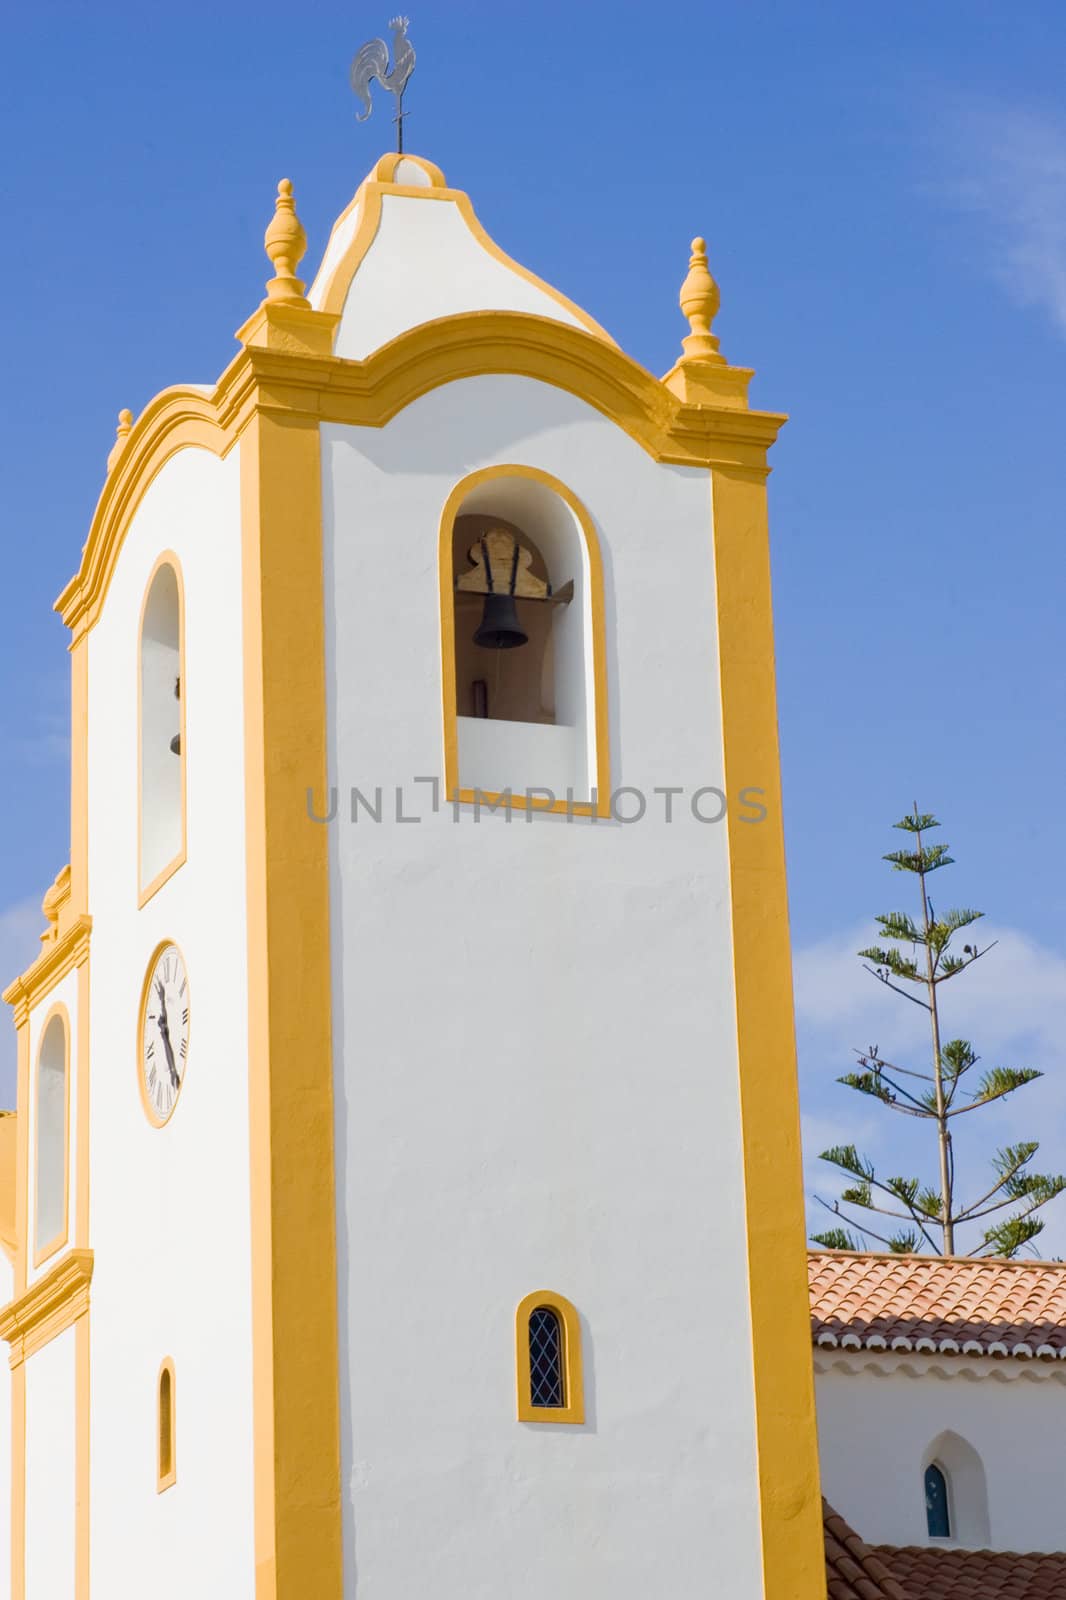 A vibrant church, white with yellow accents, set against a deep blue sky.